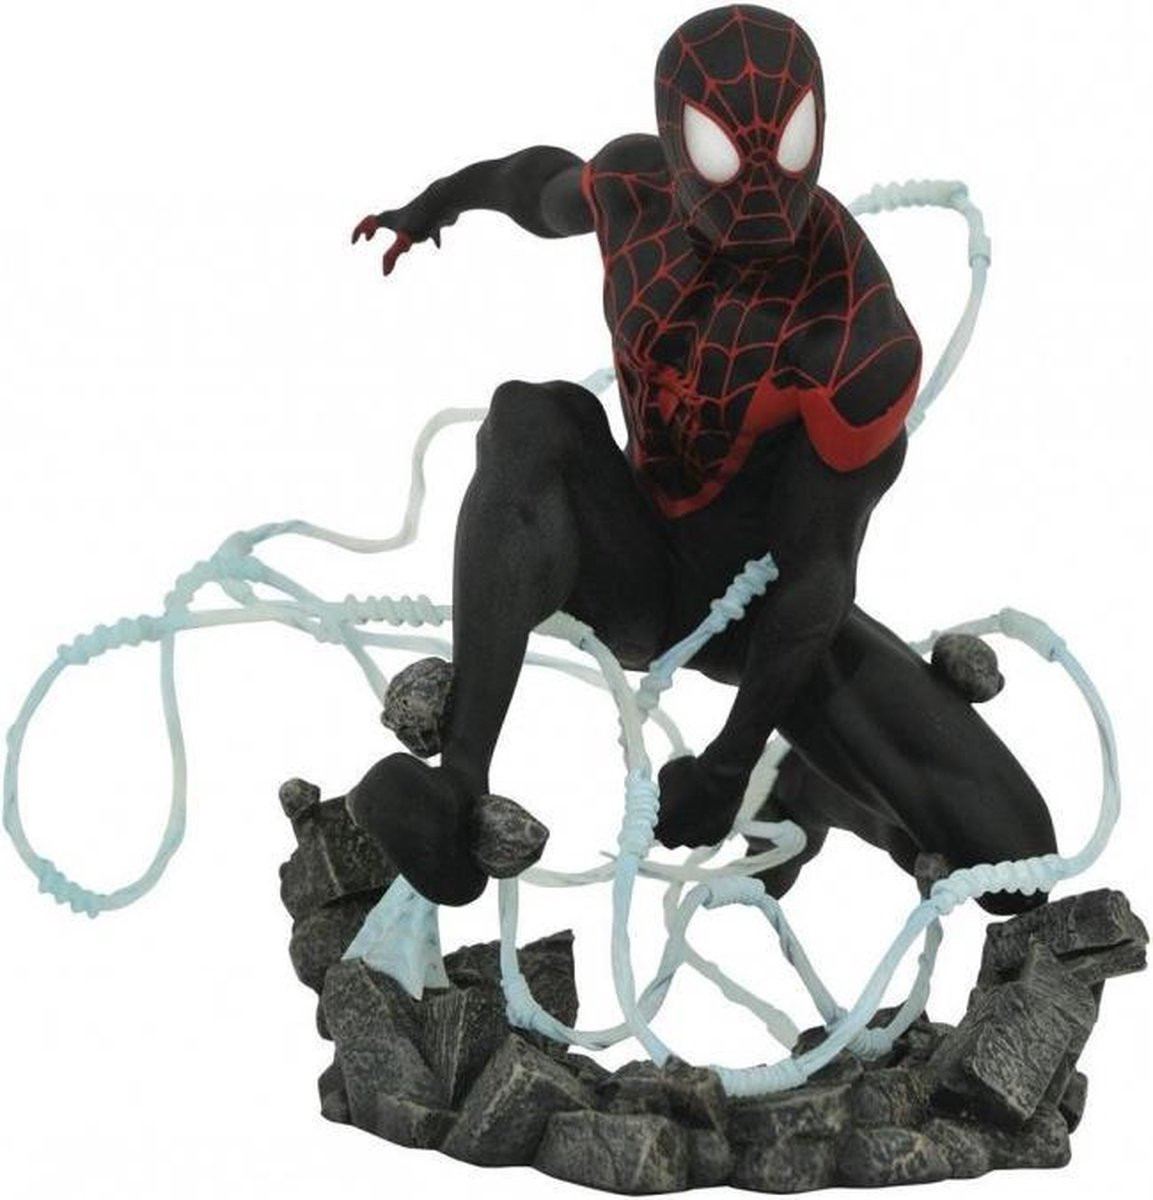 Diamond Select Toys Spider-Man Premier Collection - Miles Morales Statue